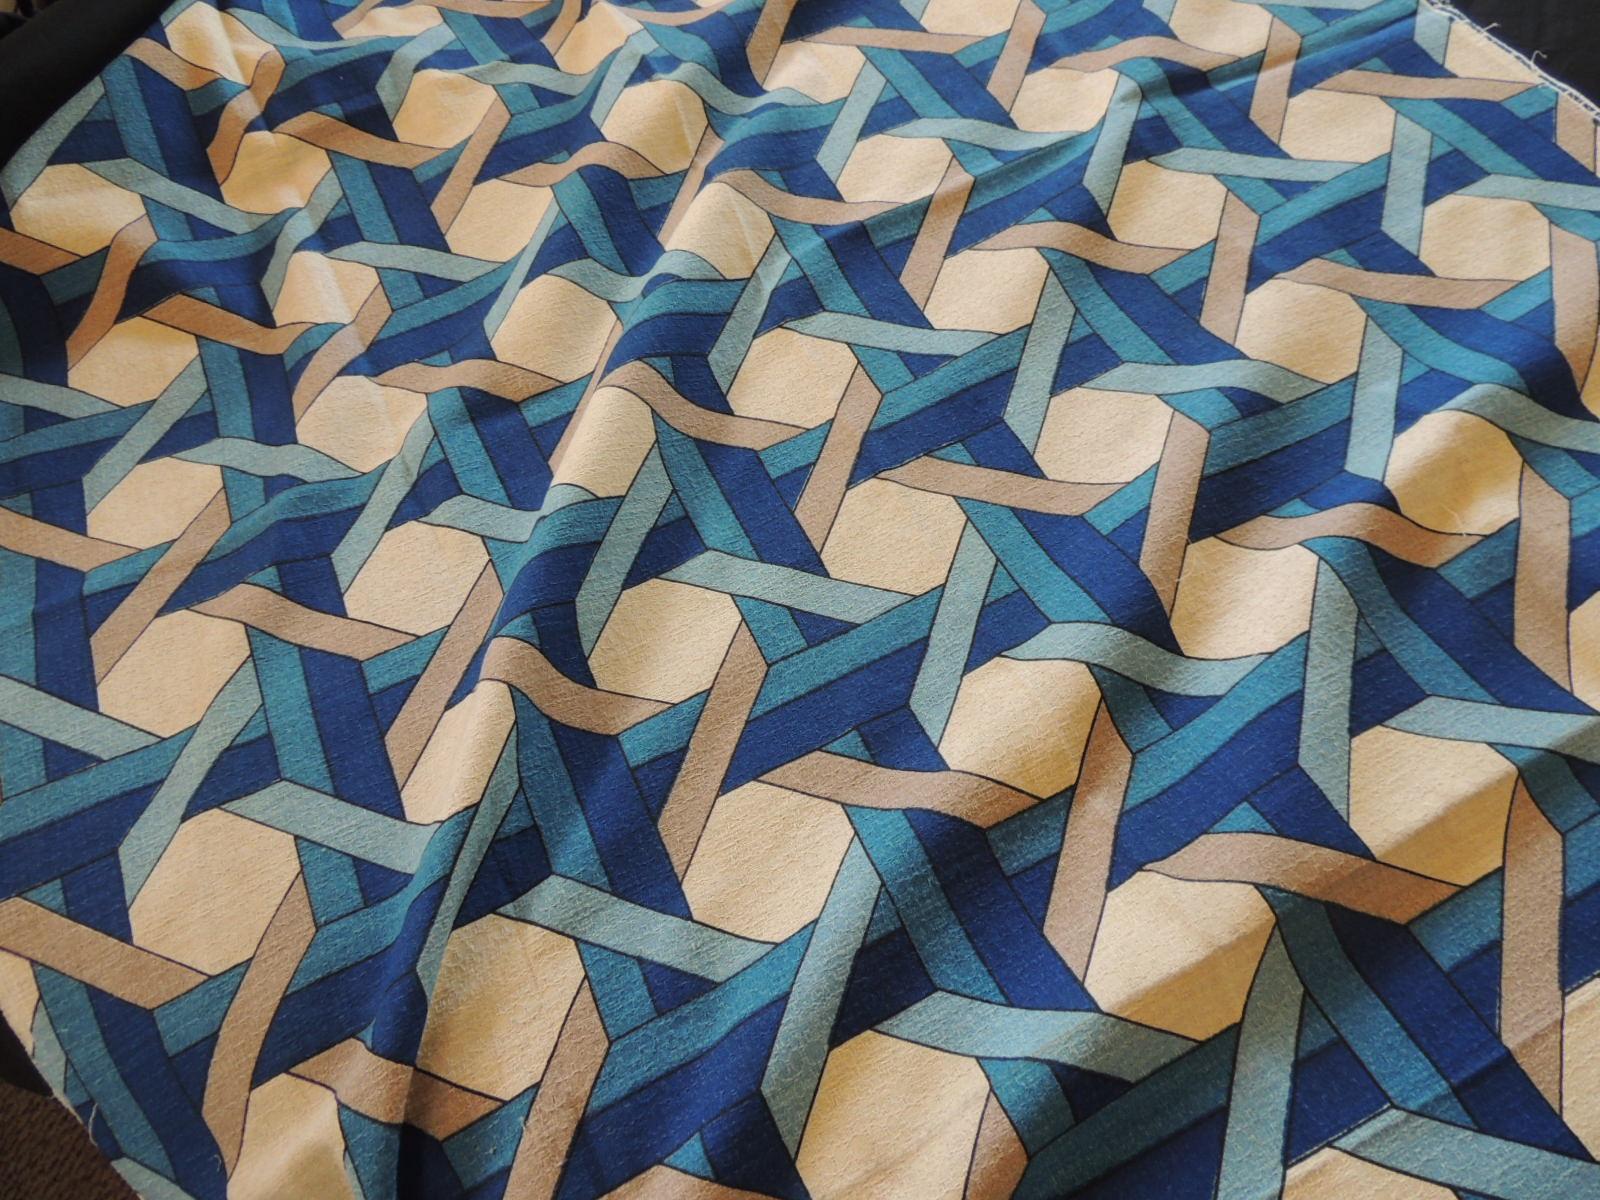 Fabric by The Yard: Vintage blue and tan trellis pattern bark cloth textile.
Ideal for pillows, curtains or upholstery.
Size: 46